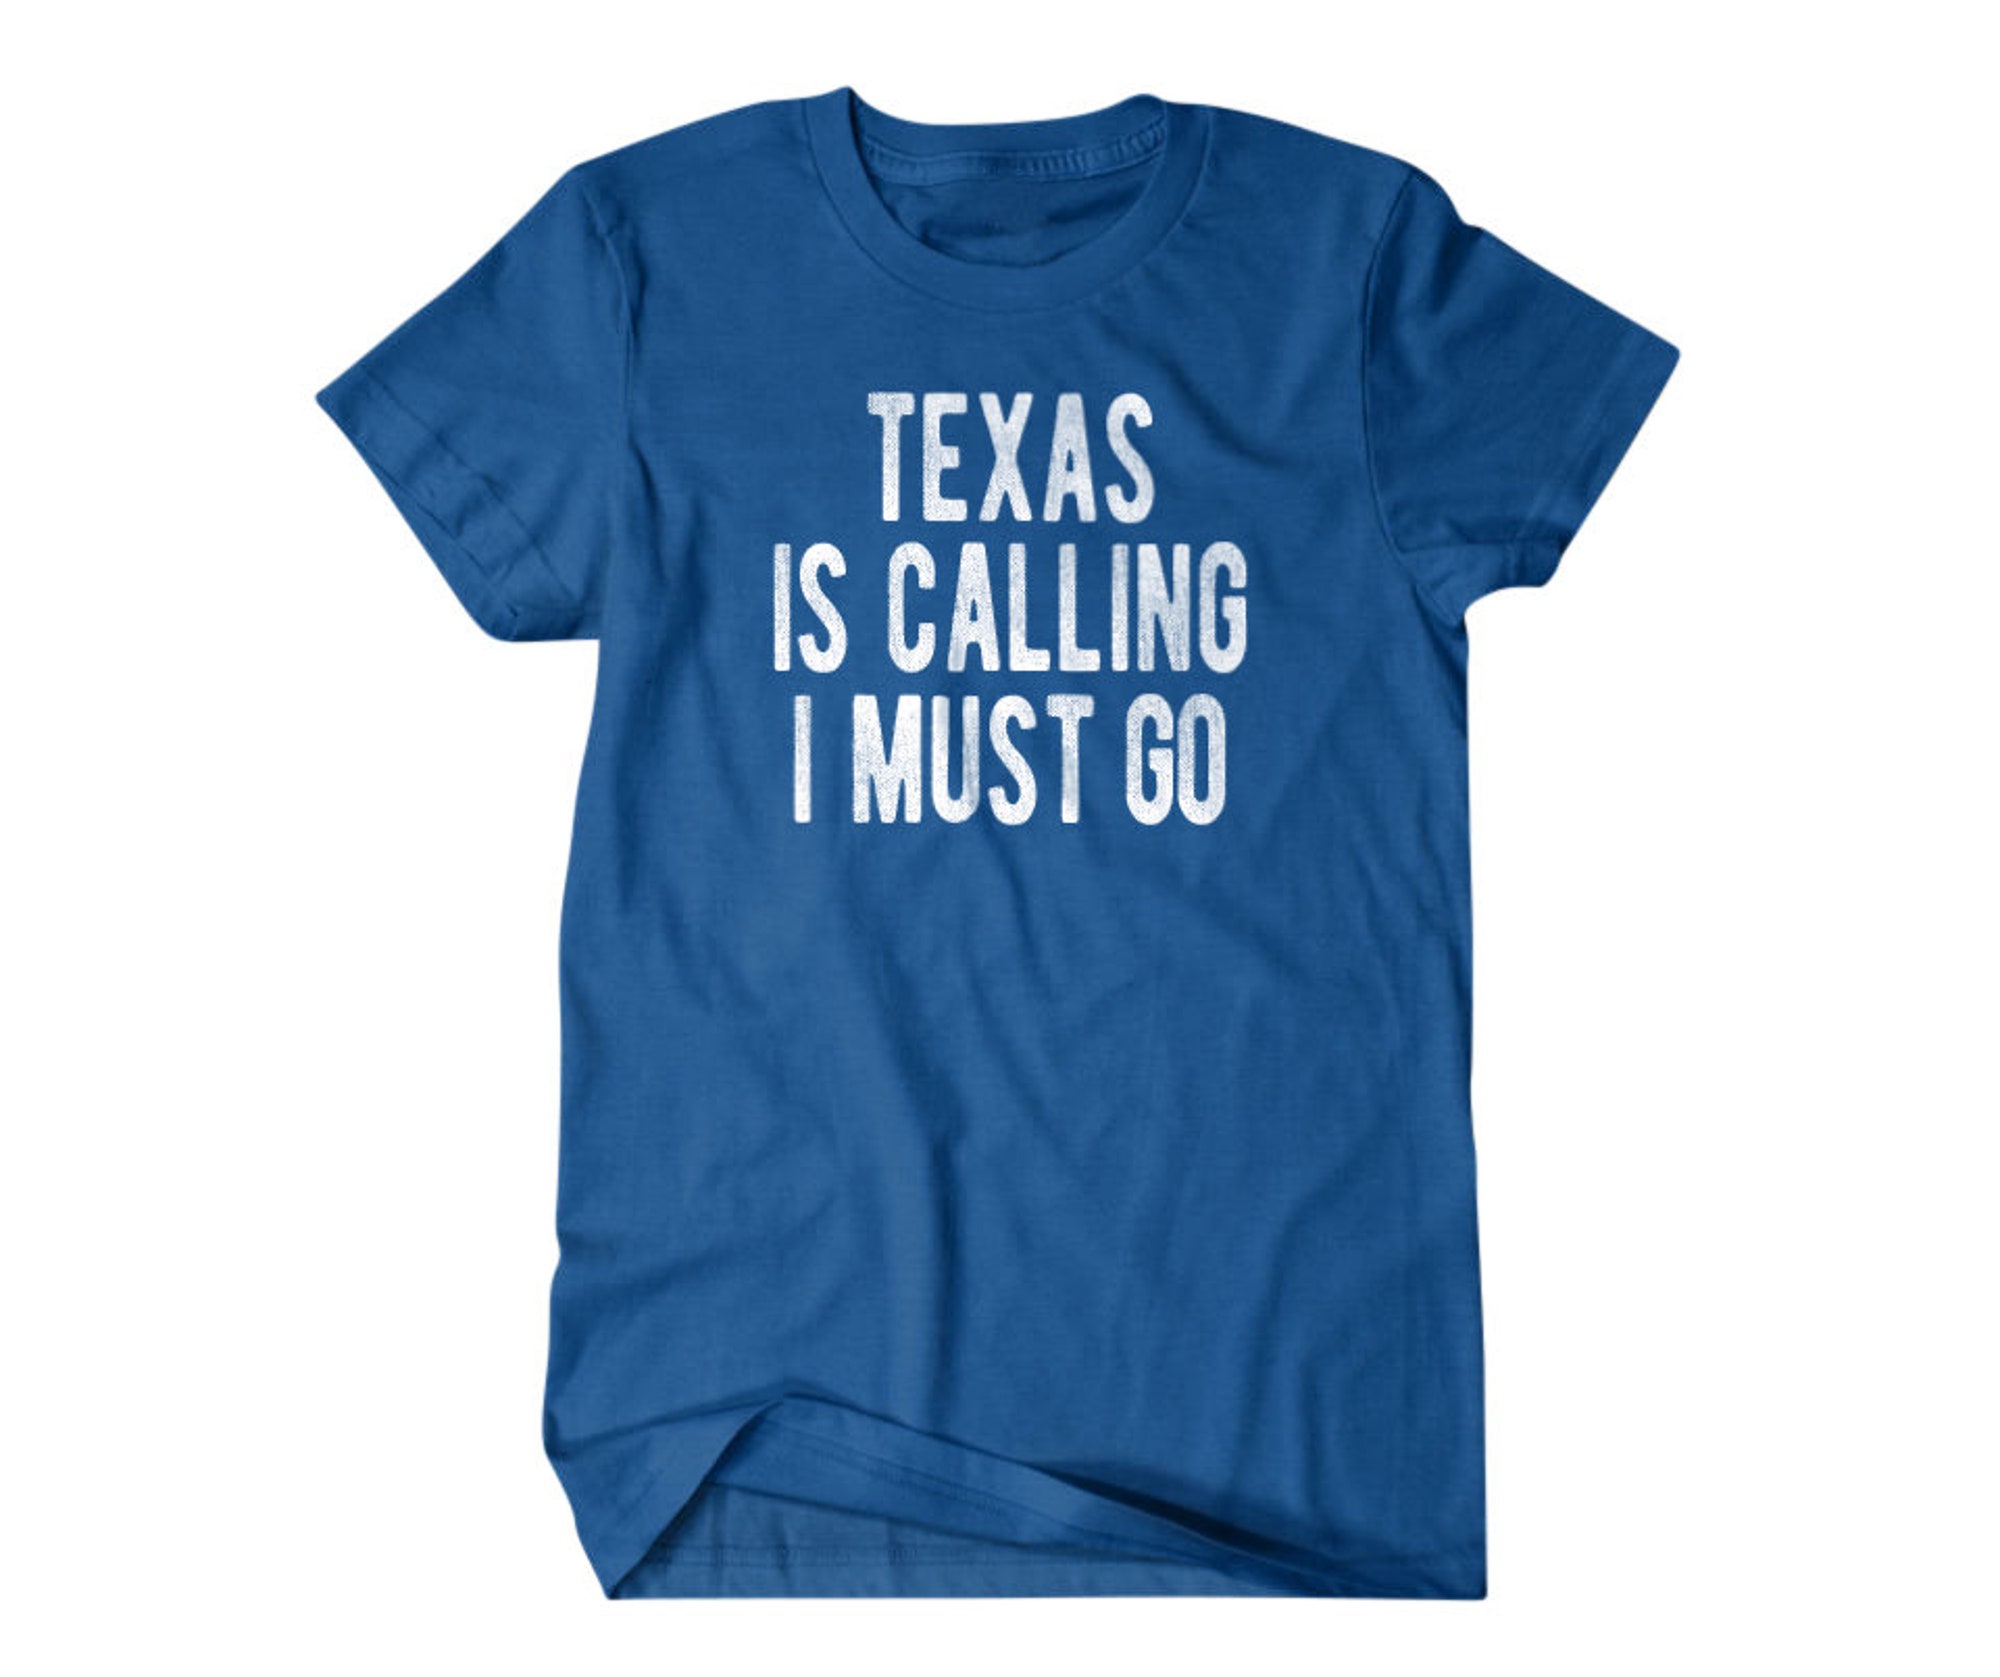 Discover Texas shirt, Texas gift, Texas is calling I must go, Hilarious shirts for Hilarious people 317